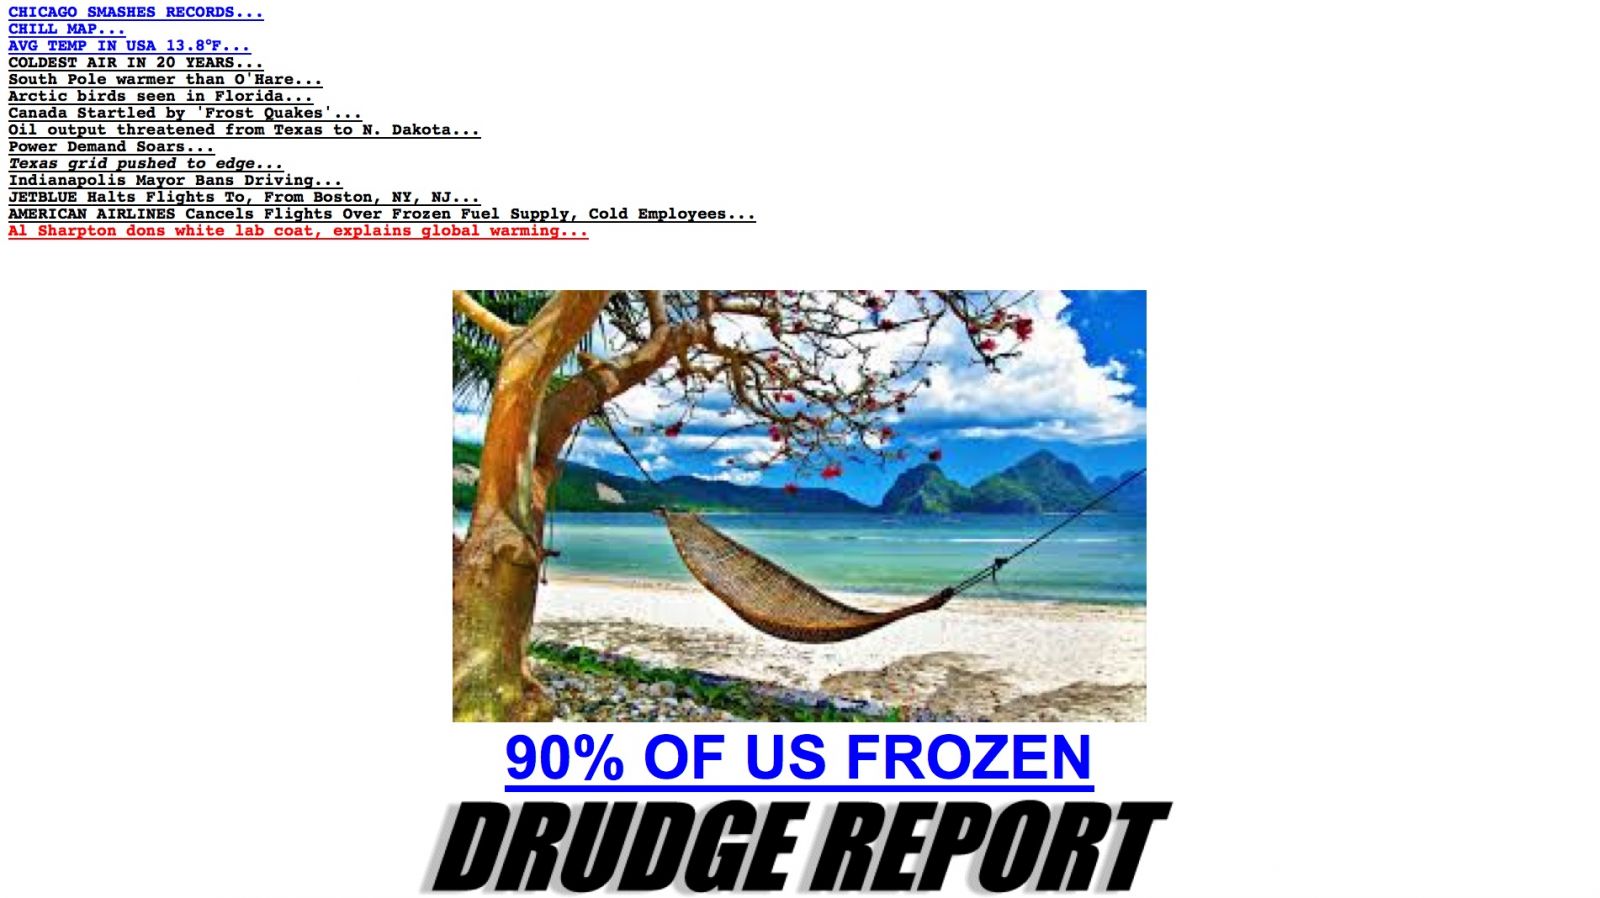 The Polar Vortex: A Physical Manifestation of the "Chilling Effect" of NSA Surveillance? Drudge_90_pc_frozen